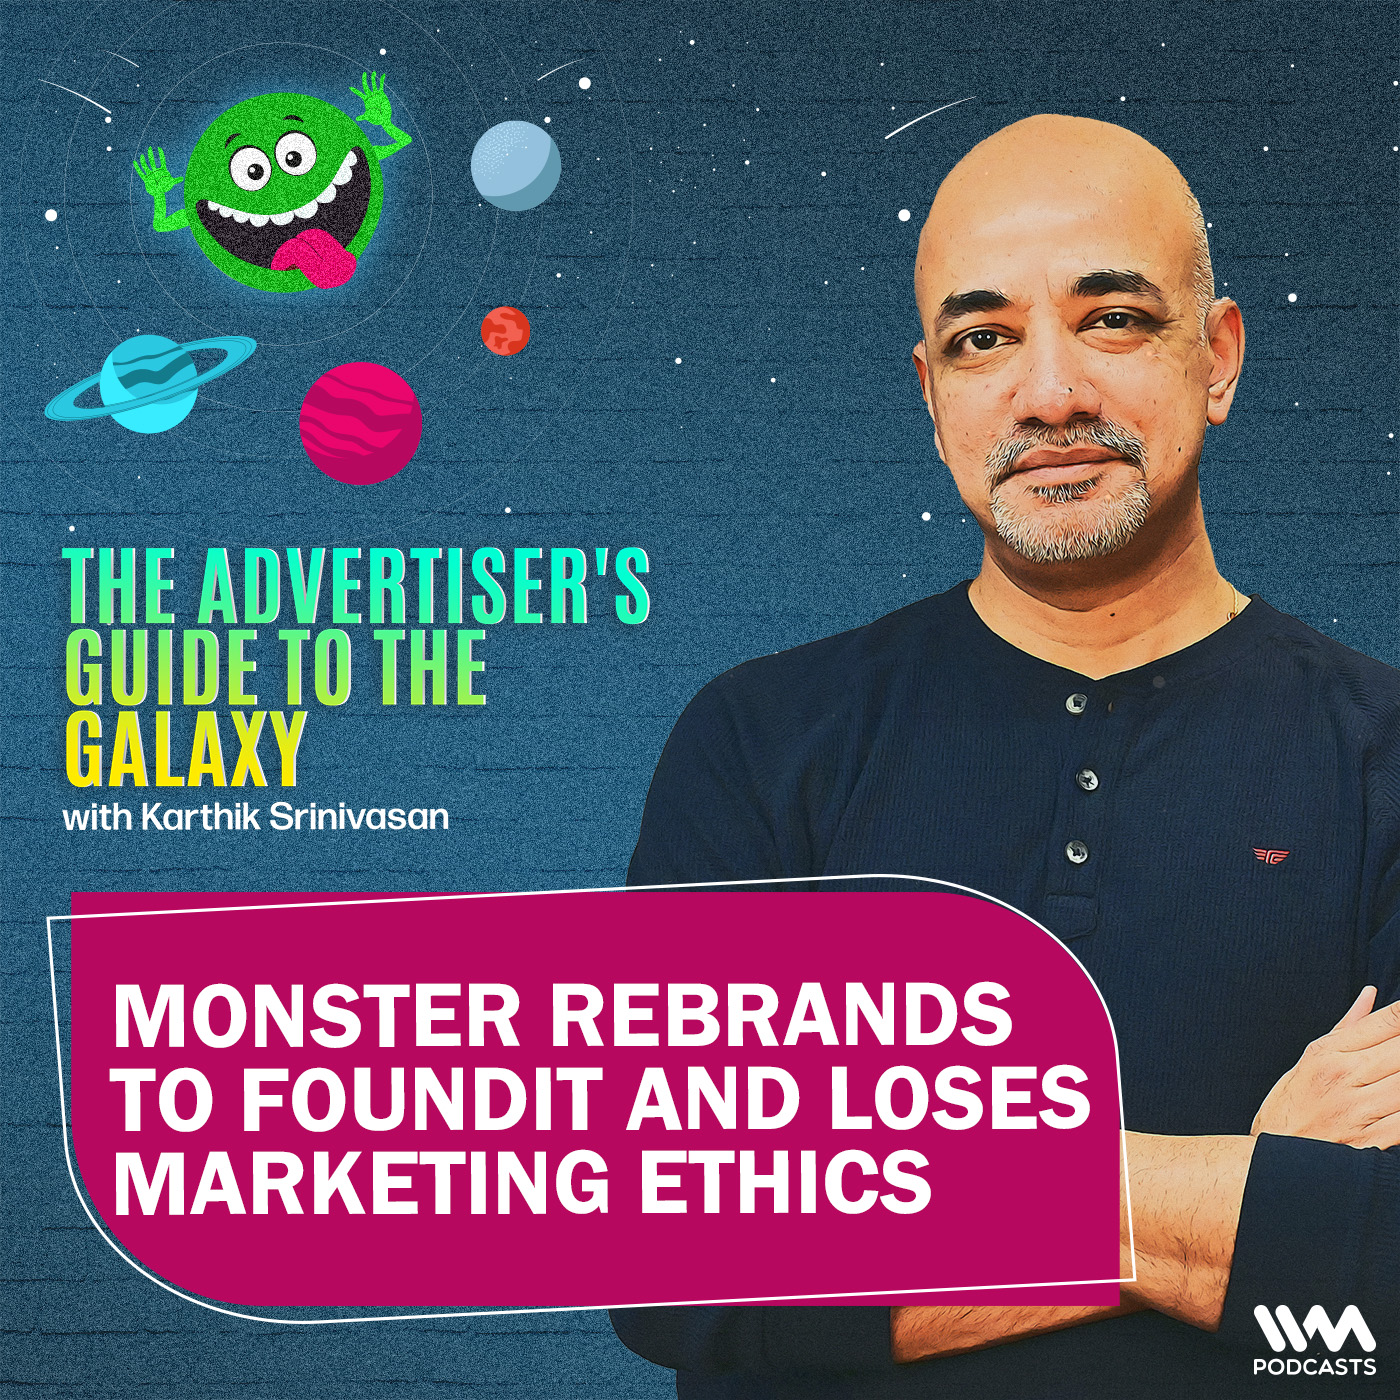 Monster rebrands to Foundit and loses marketing ethics